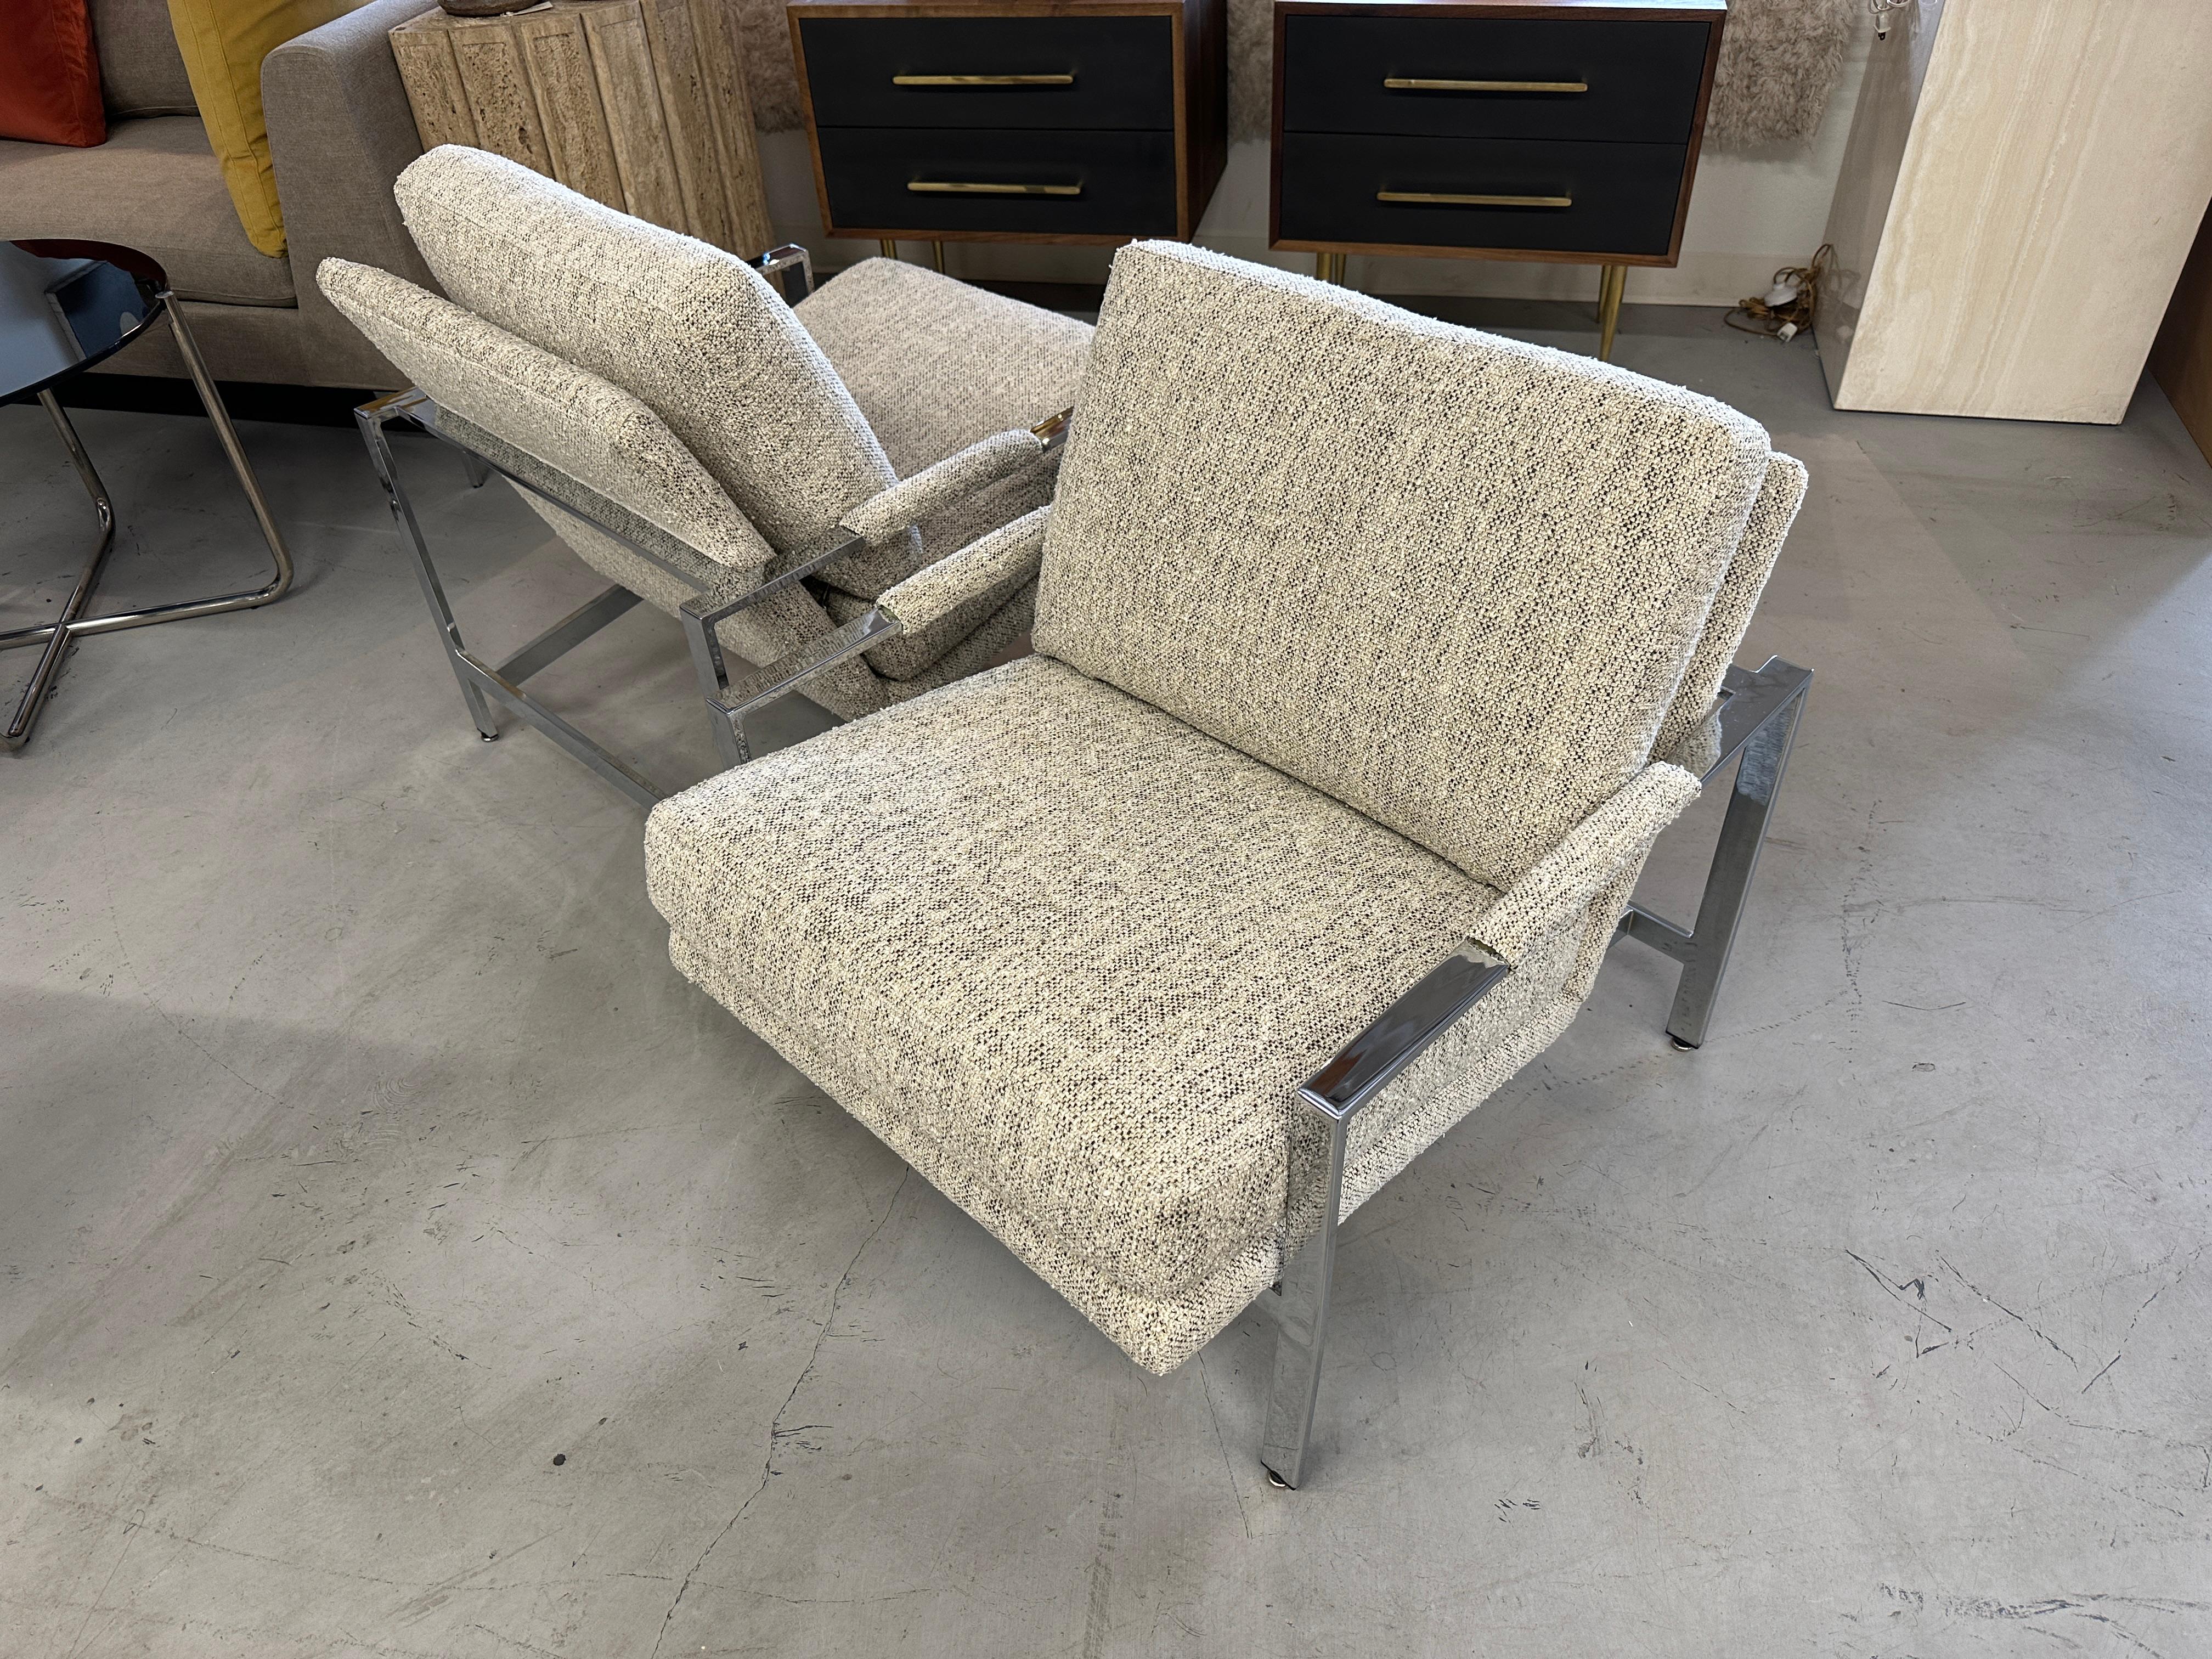 A stunning pair of Milo Baughman for Thayer Coggin from 1976 beautifully reupholstered in an Italian tweed chenille. Cotton/Viscose/Poly blend. The texture and color are wonderful. Our upholsterer saved the original labels and reapplied them to the